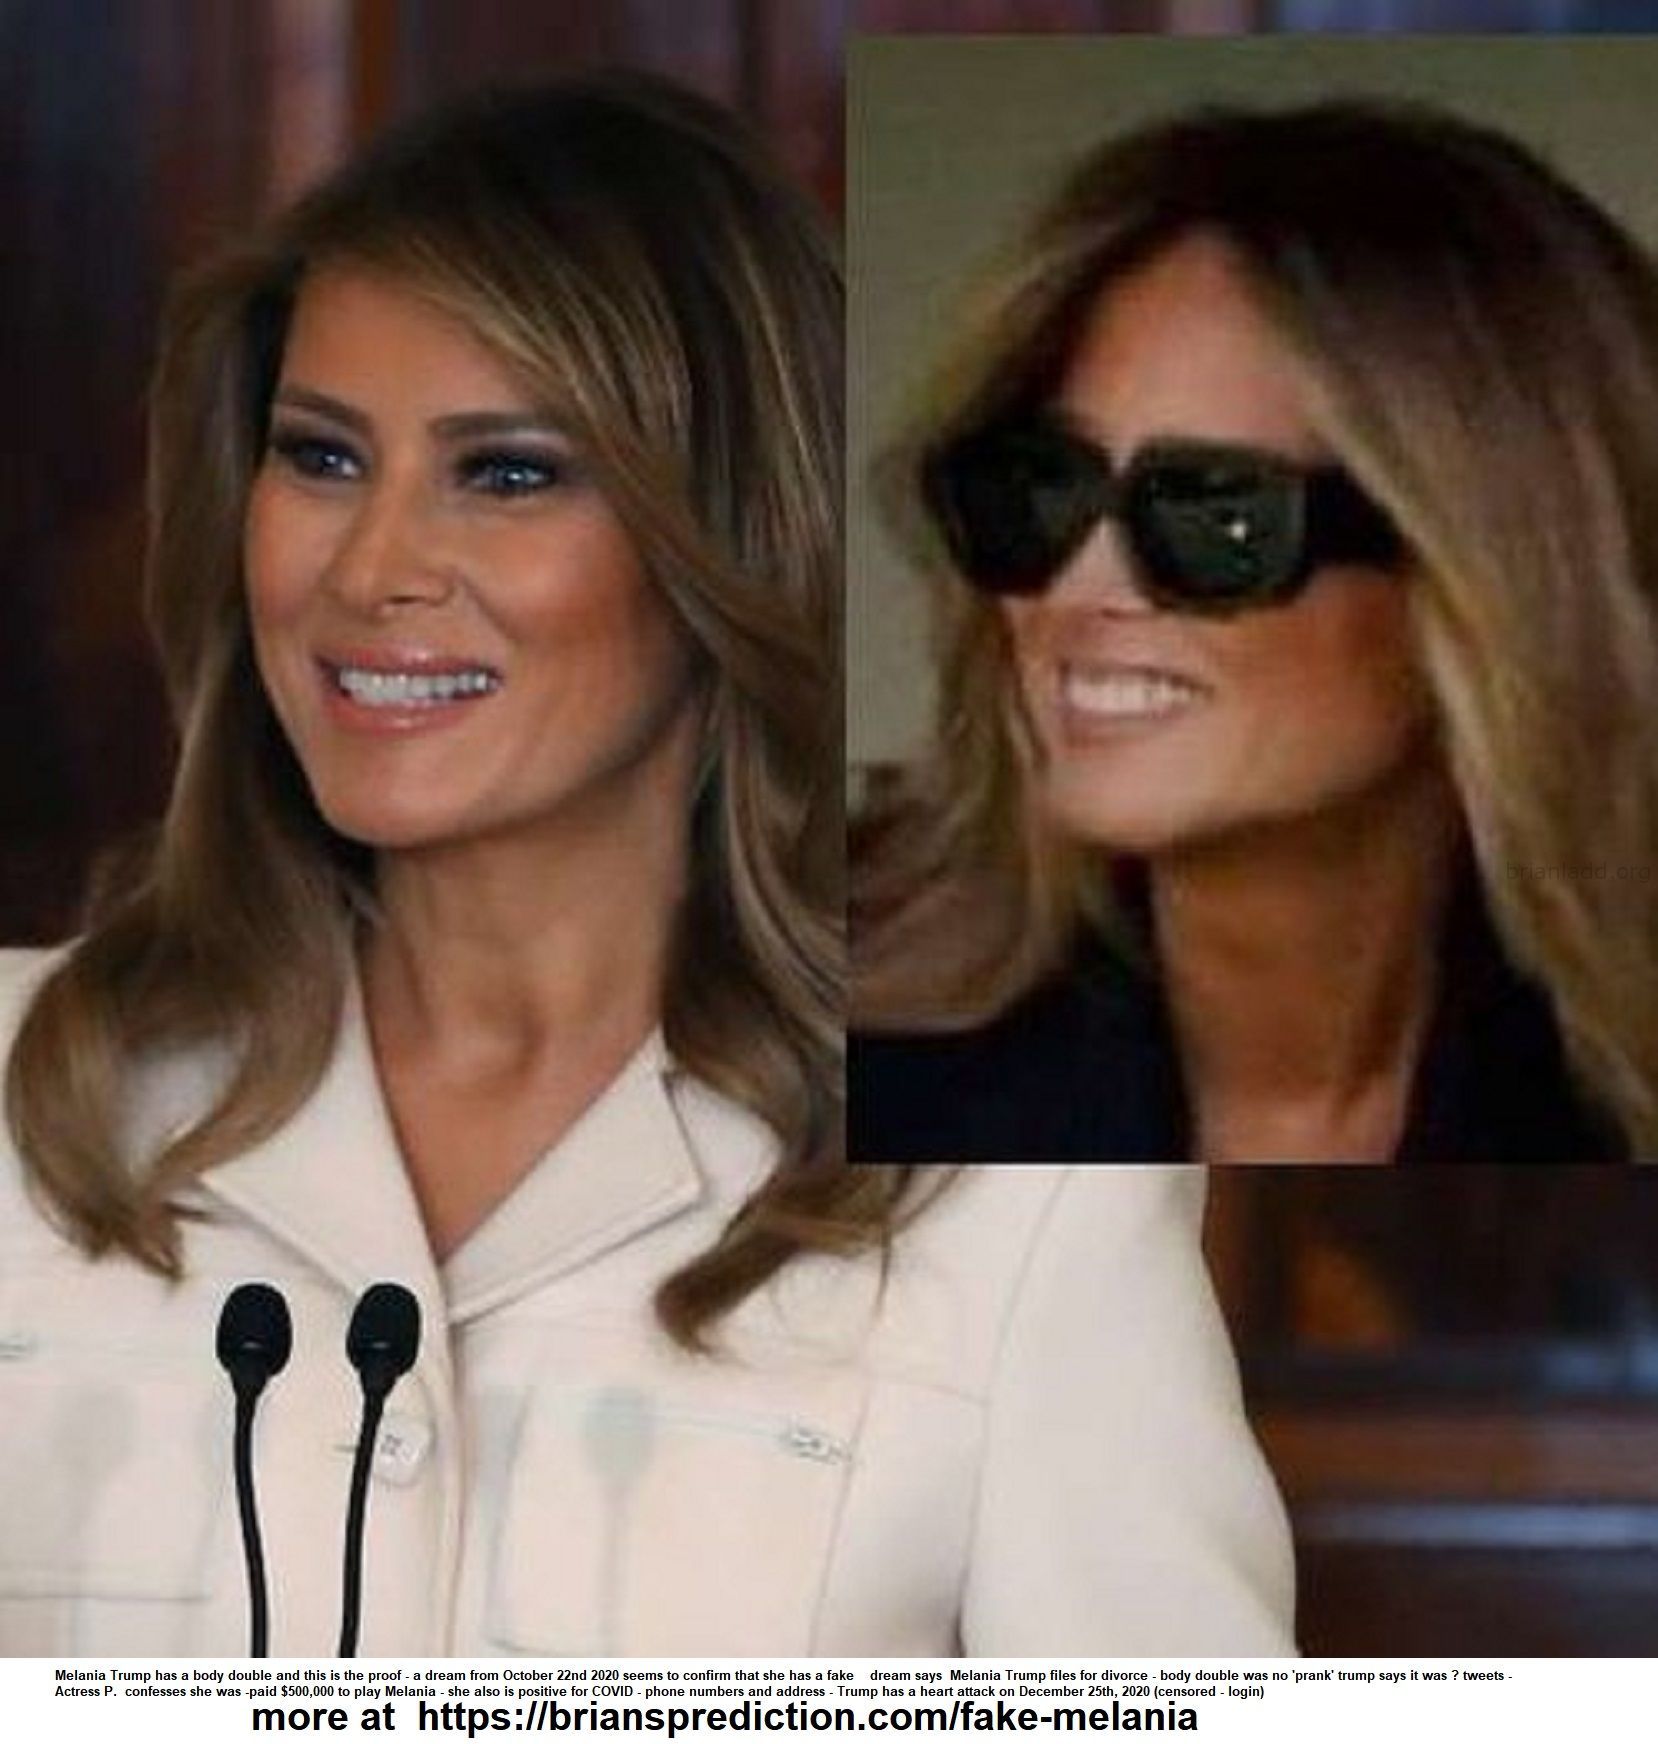 Fake Melania Trump Proof Psychic - Melania Trump Has A Body Double And This Is The Proof - A Dream From October 22nd 202...
Melania Trump Has A Body Double And This Is The Proof - A Dream From October 22nd 2020 Seems To Confirm That She Has A Fake  Dream Says  Melania Trump Files For Divorce - Body Double Was No 'prank' Trump Says It Was ? Tweets - Actress P.  Confesses She Was -paid $500,000 To Play Melania - She Also Is Positive For Covid - Phone Numbers And Address - Trump Has A Heart Attack On December 25th 2020 (censored - Login)  More At   https://briansprediction.com/Fake-Melania
